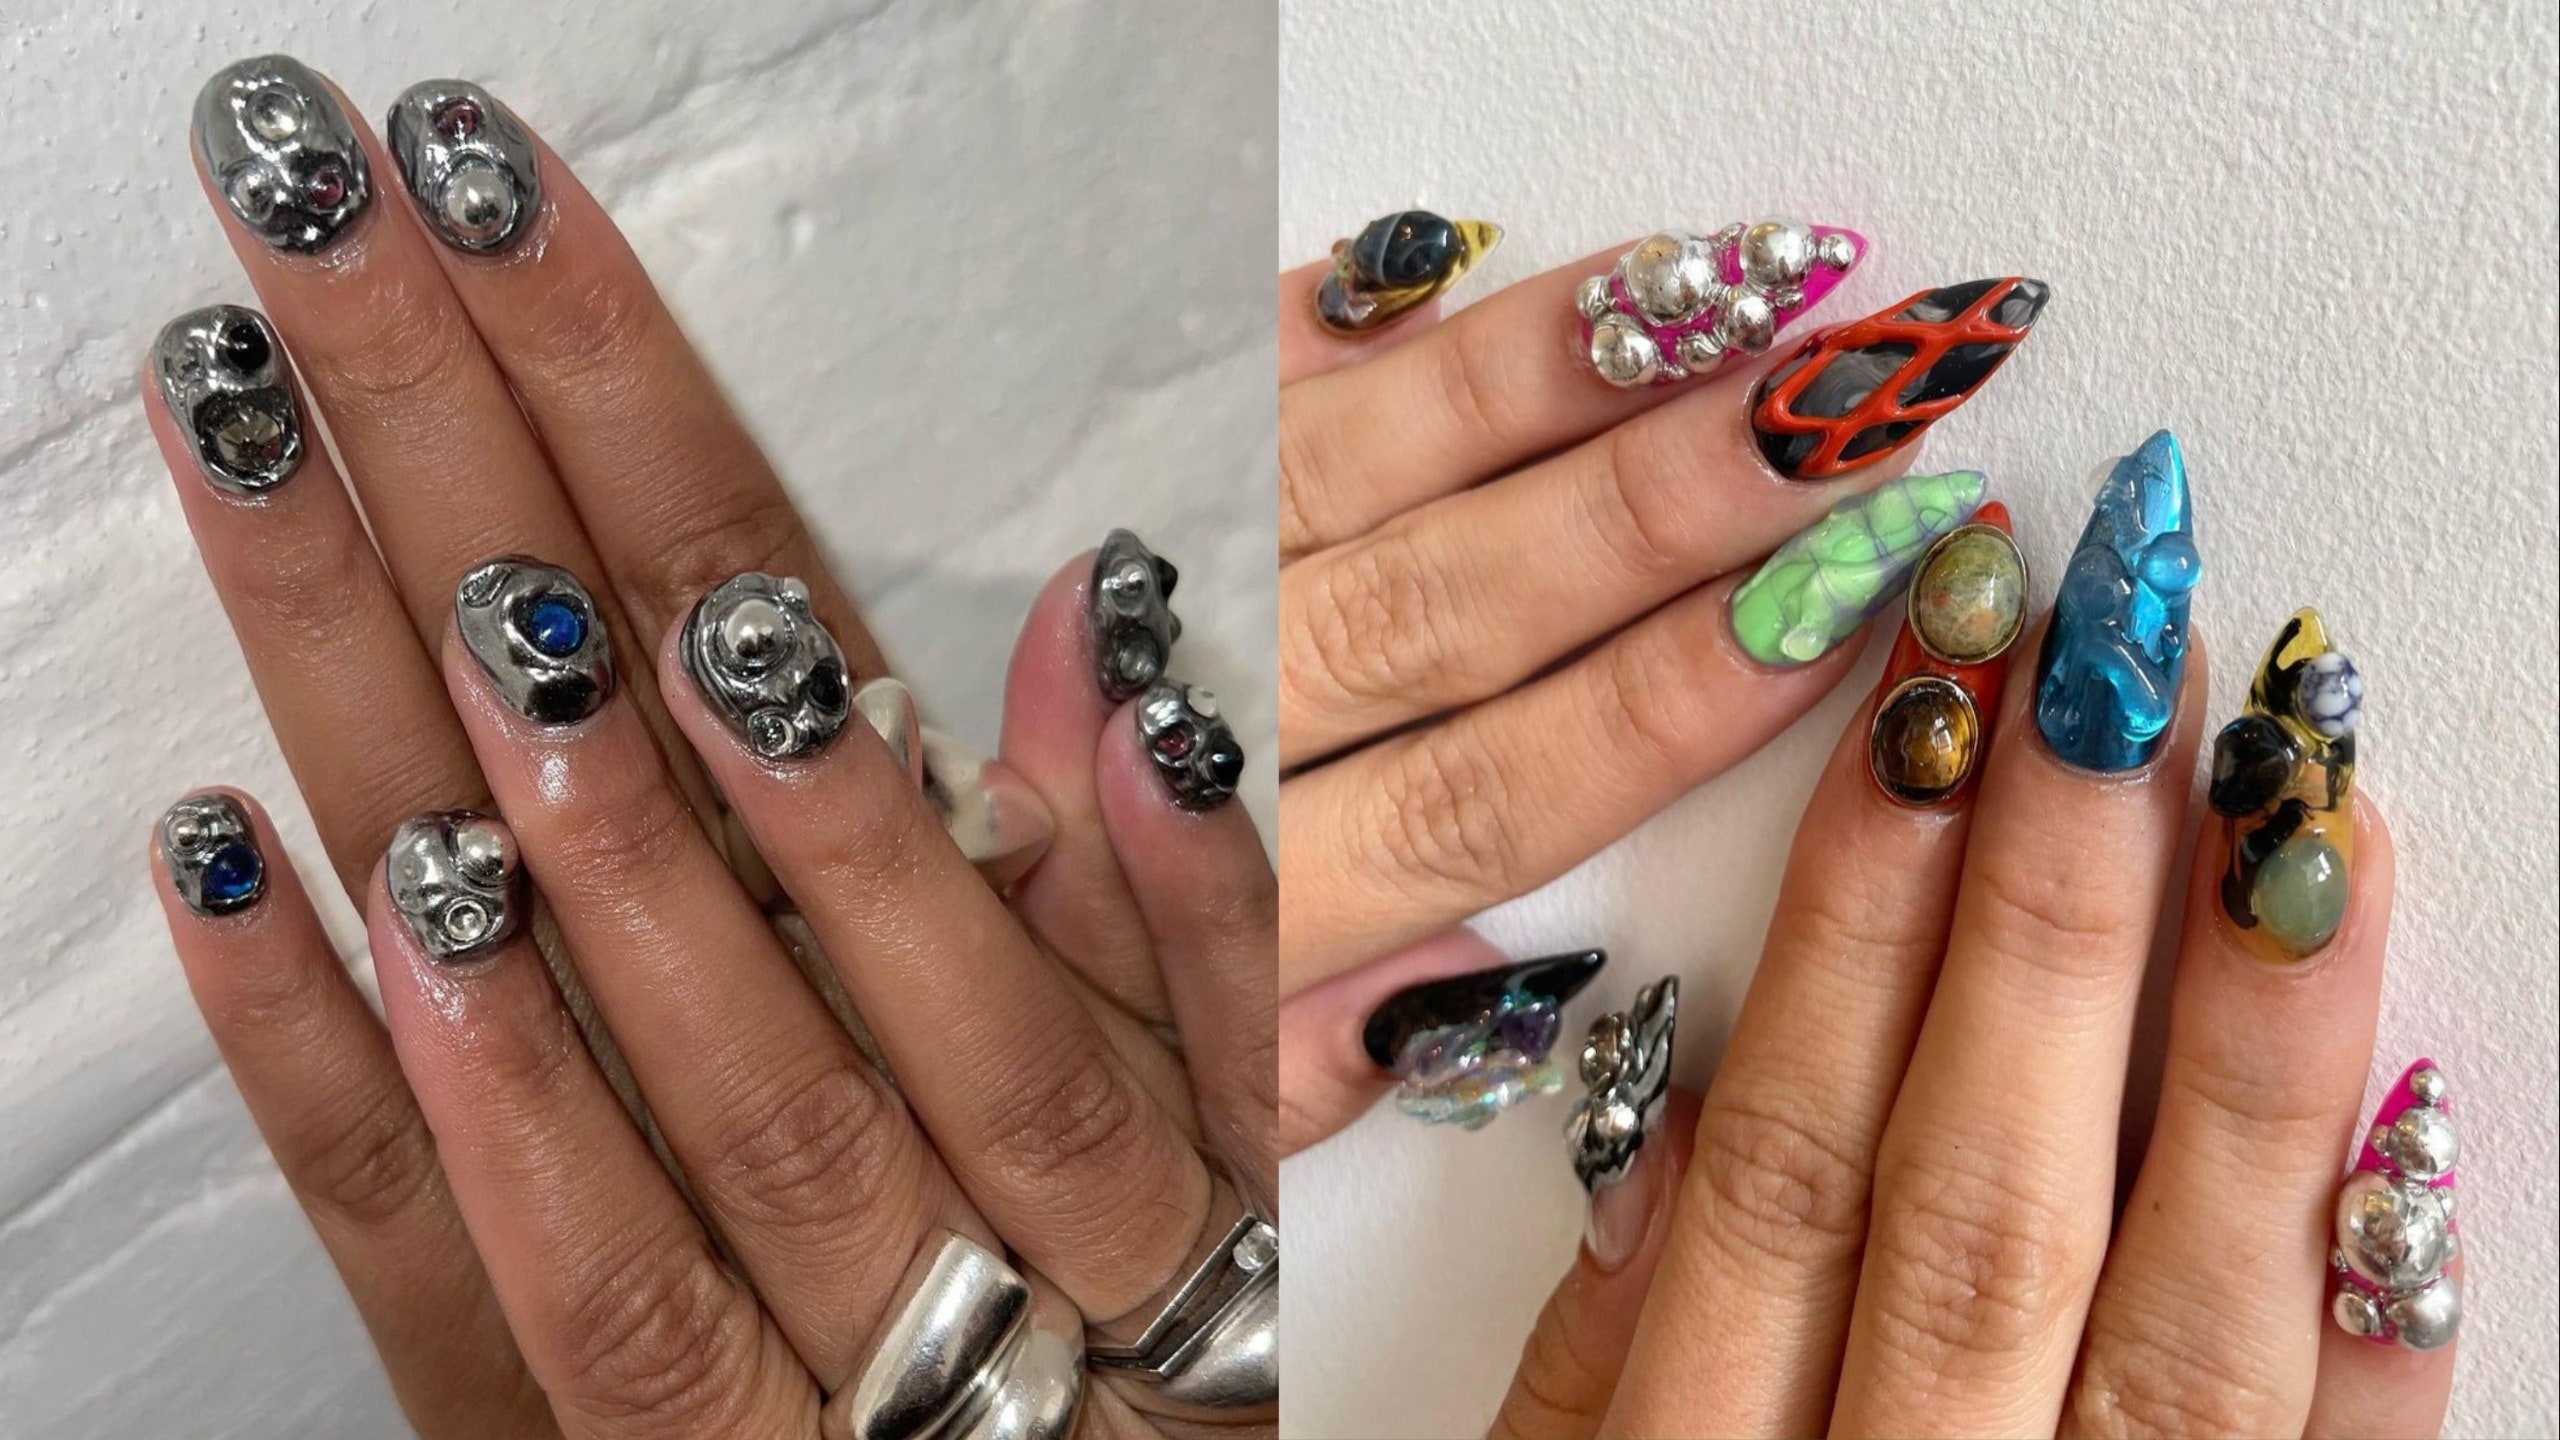 Why And When Would You Offer Nail Art During a Manicure